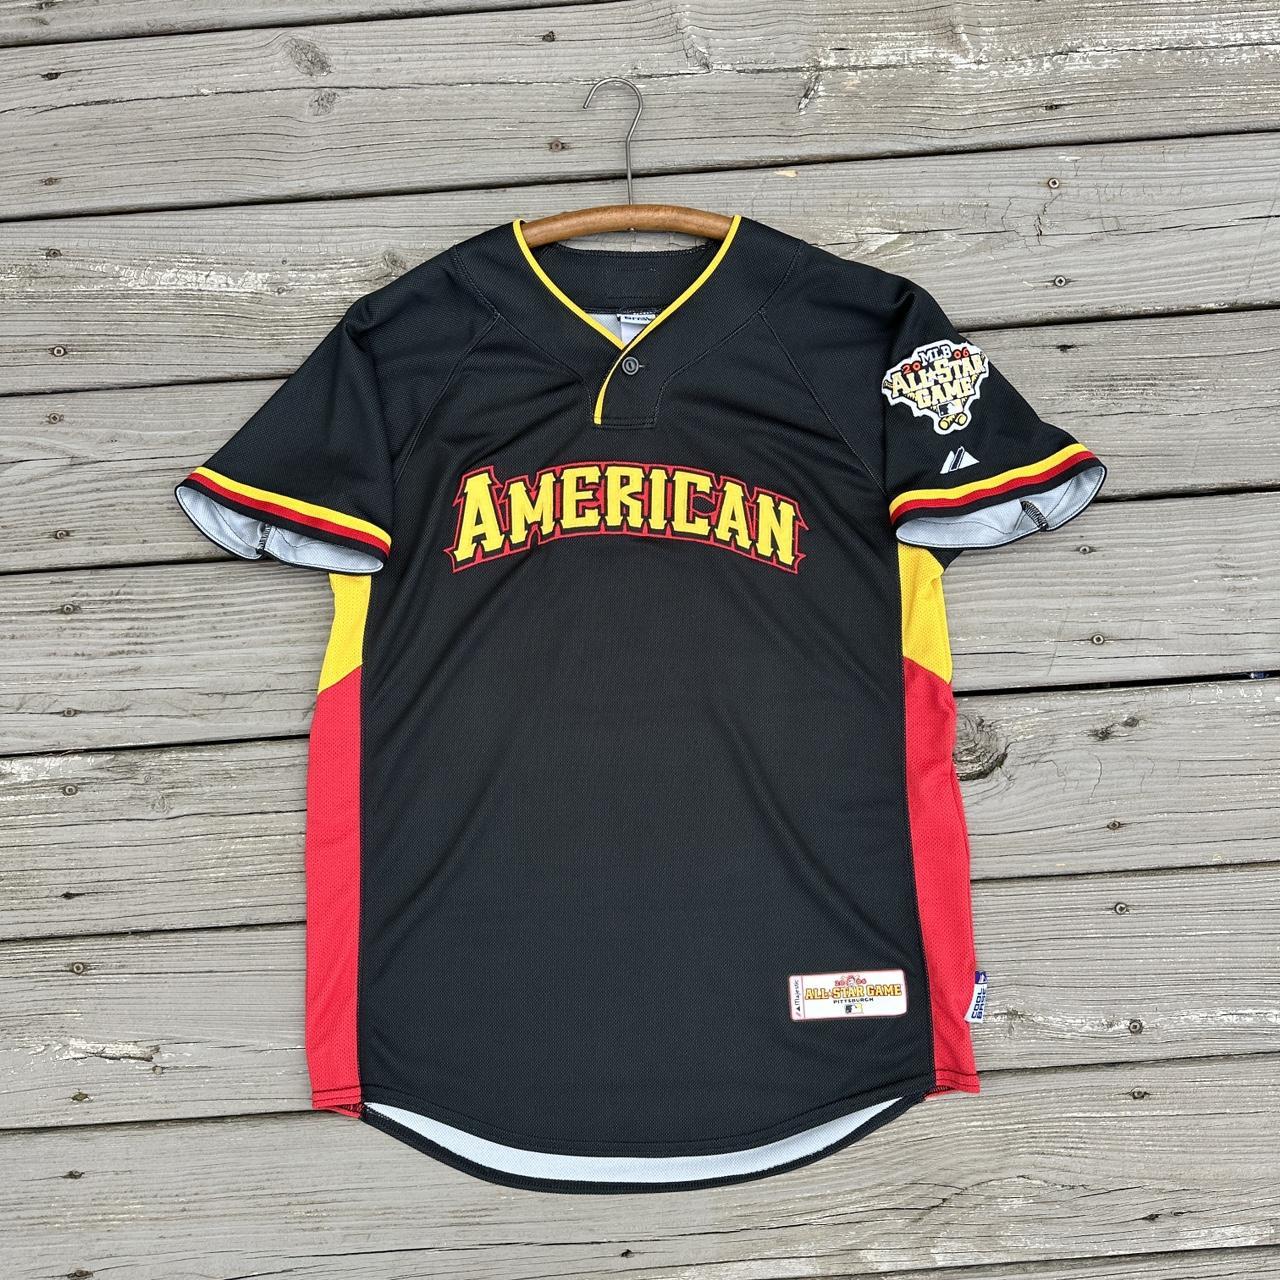 2006 MLB All Star Game American League Jersey Cool - Depop